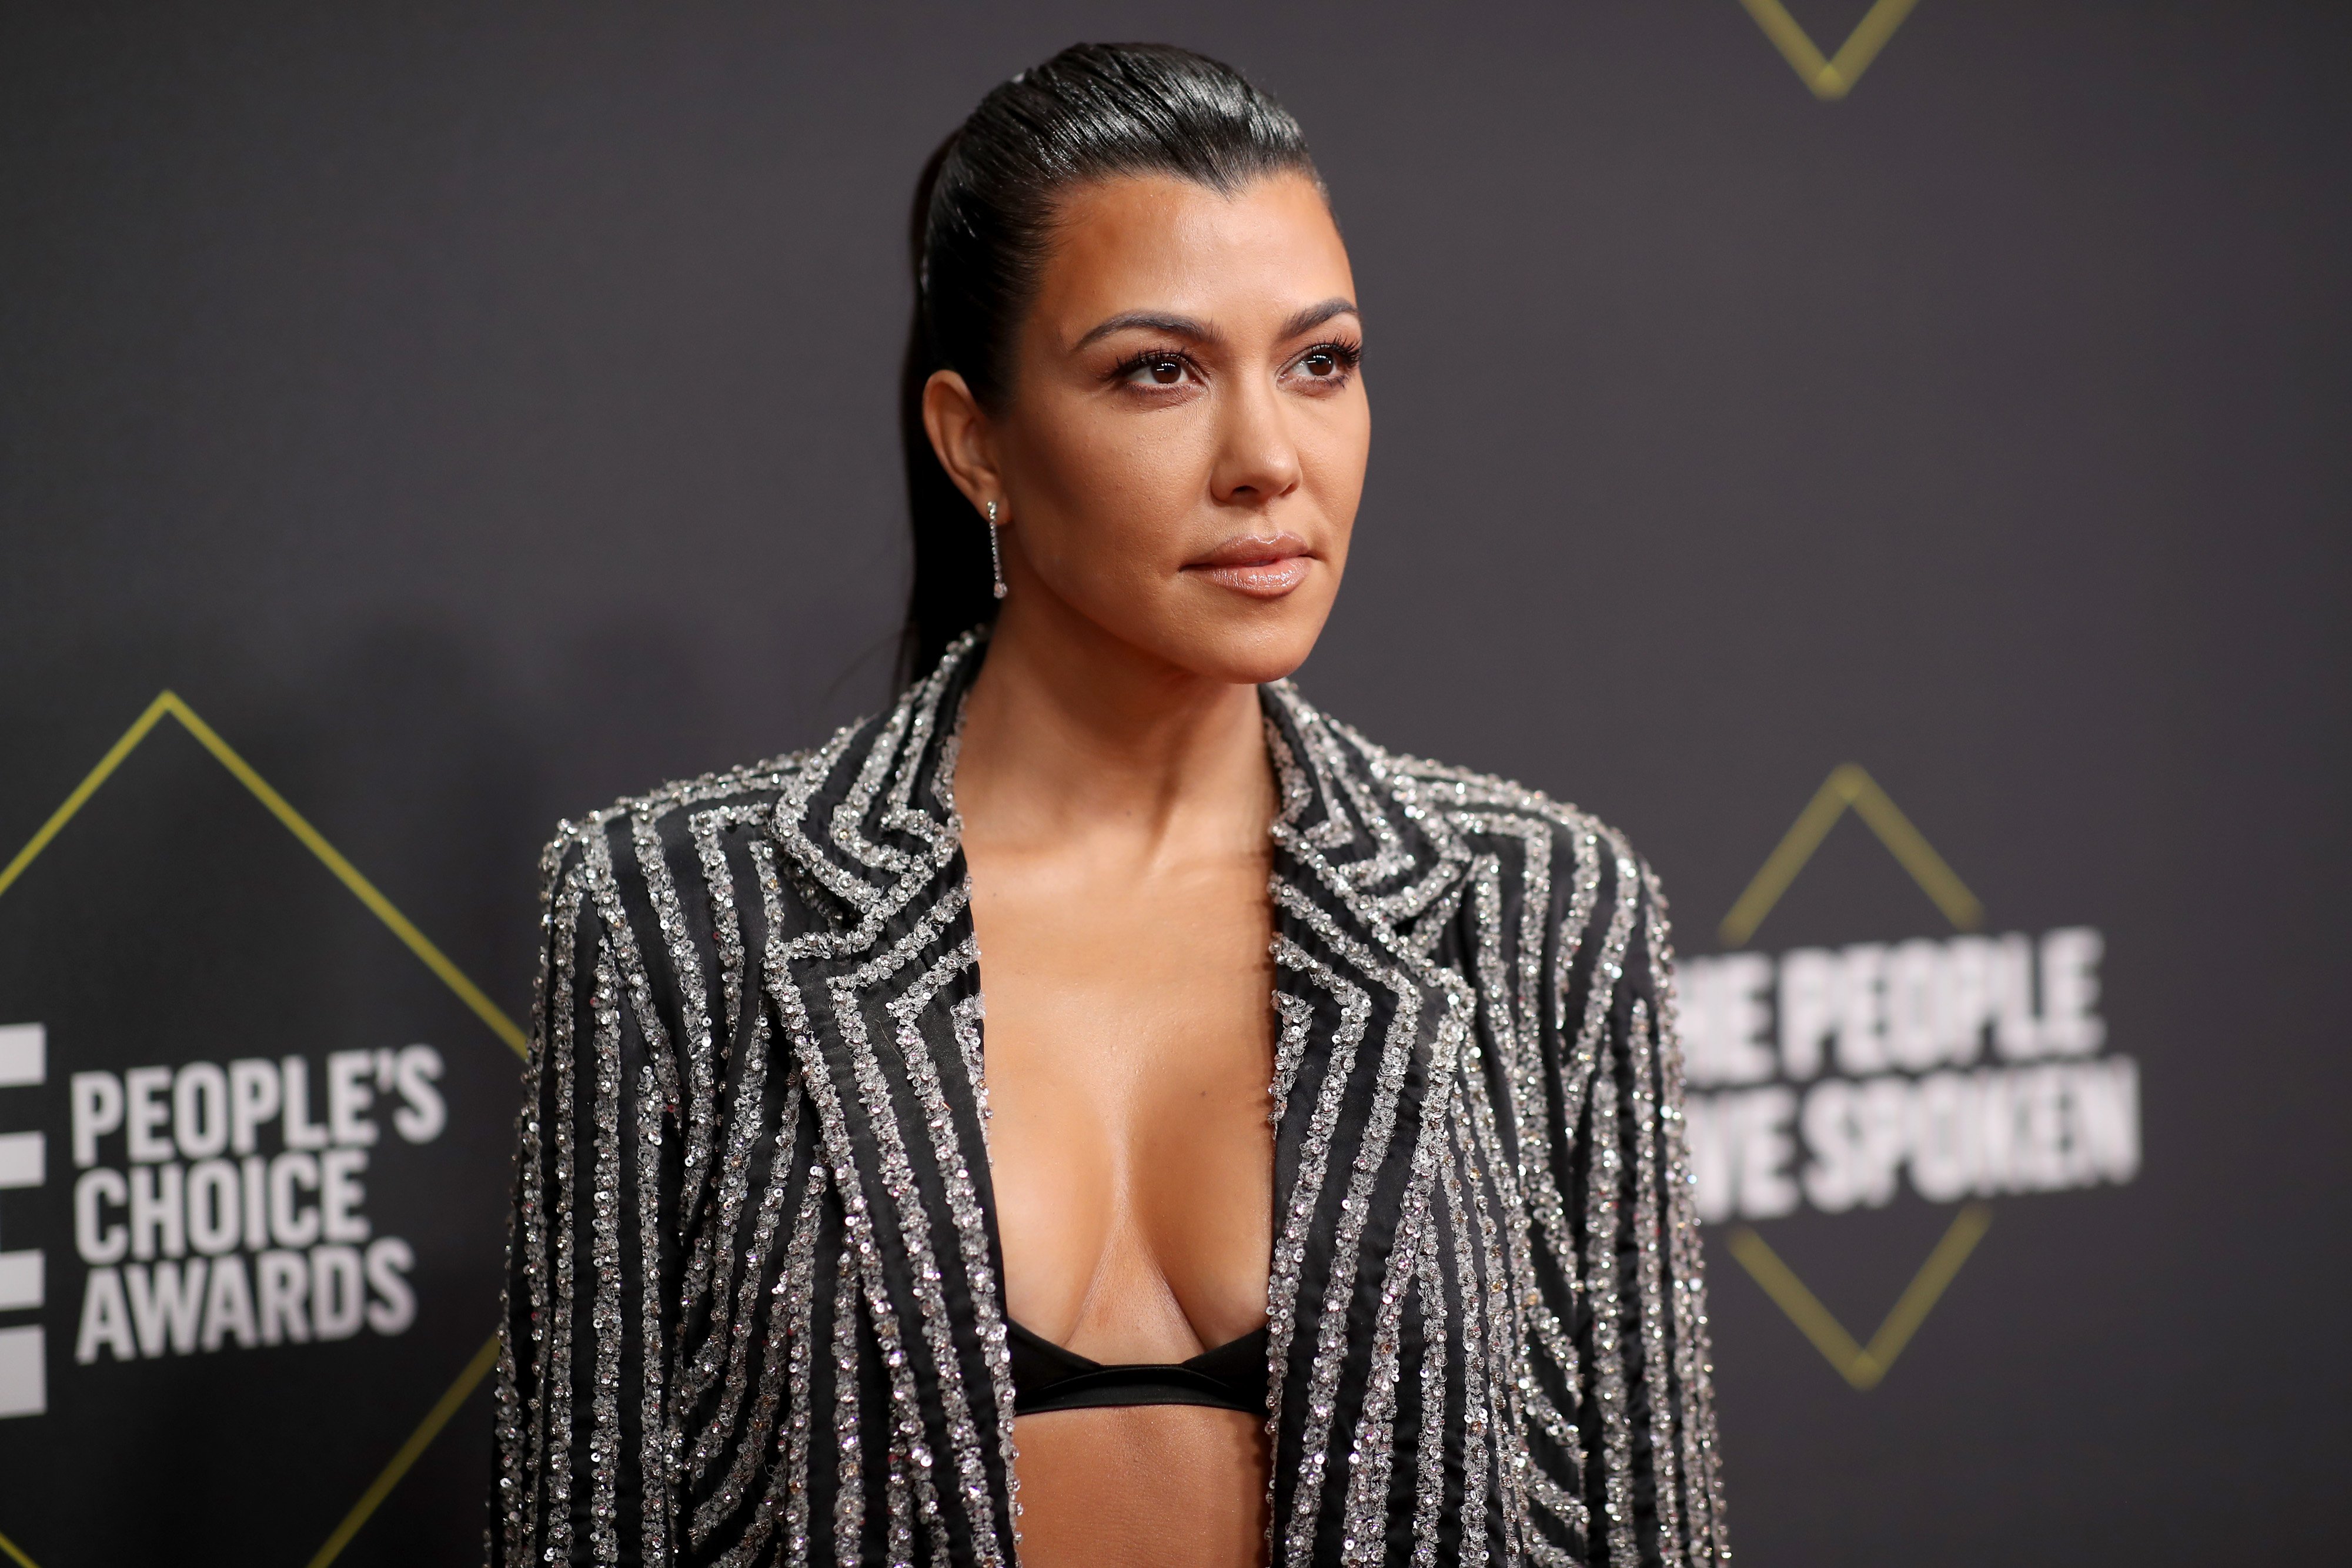 Kourtney Kardashian at the 2019 E! People's Choice Awards at the Barker Hangar on November 10, 2019.| Source: Getty Images